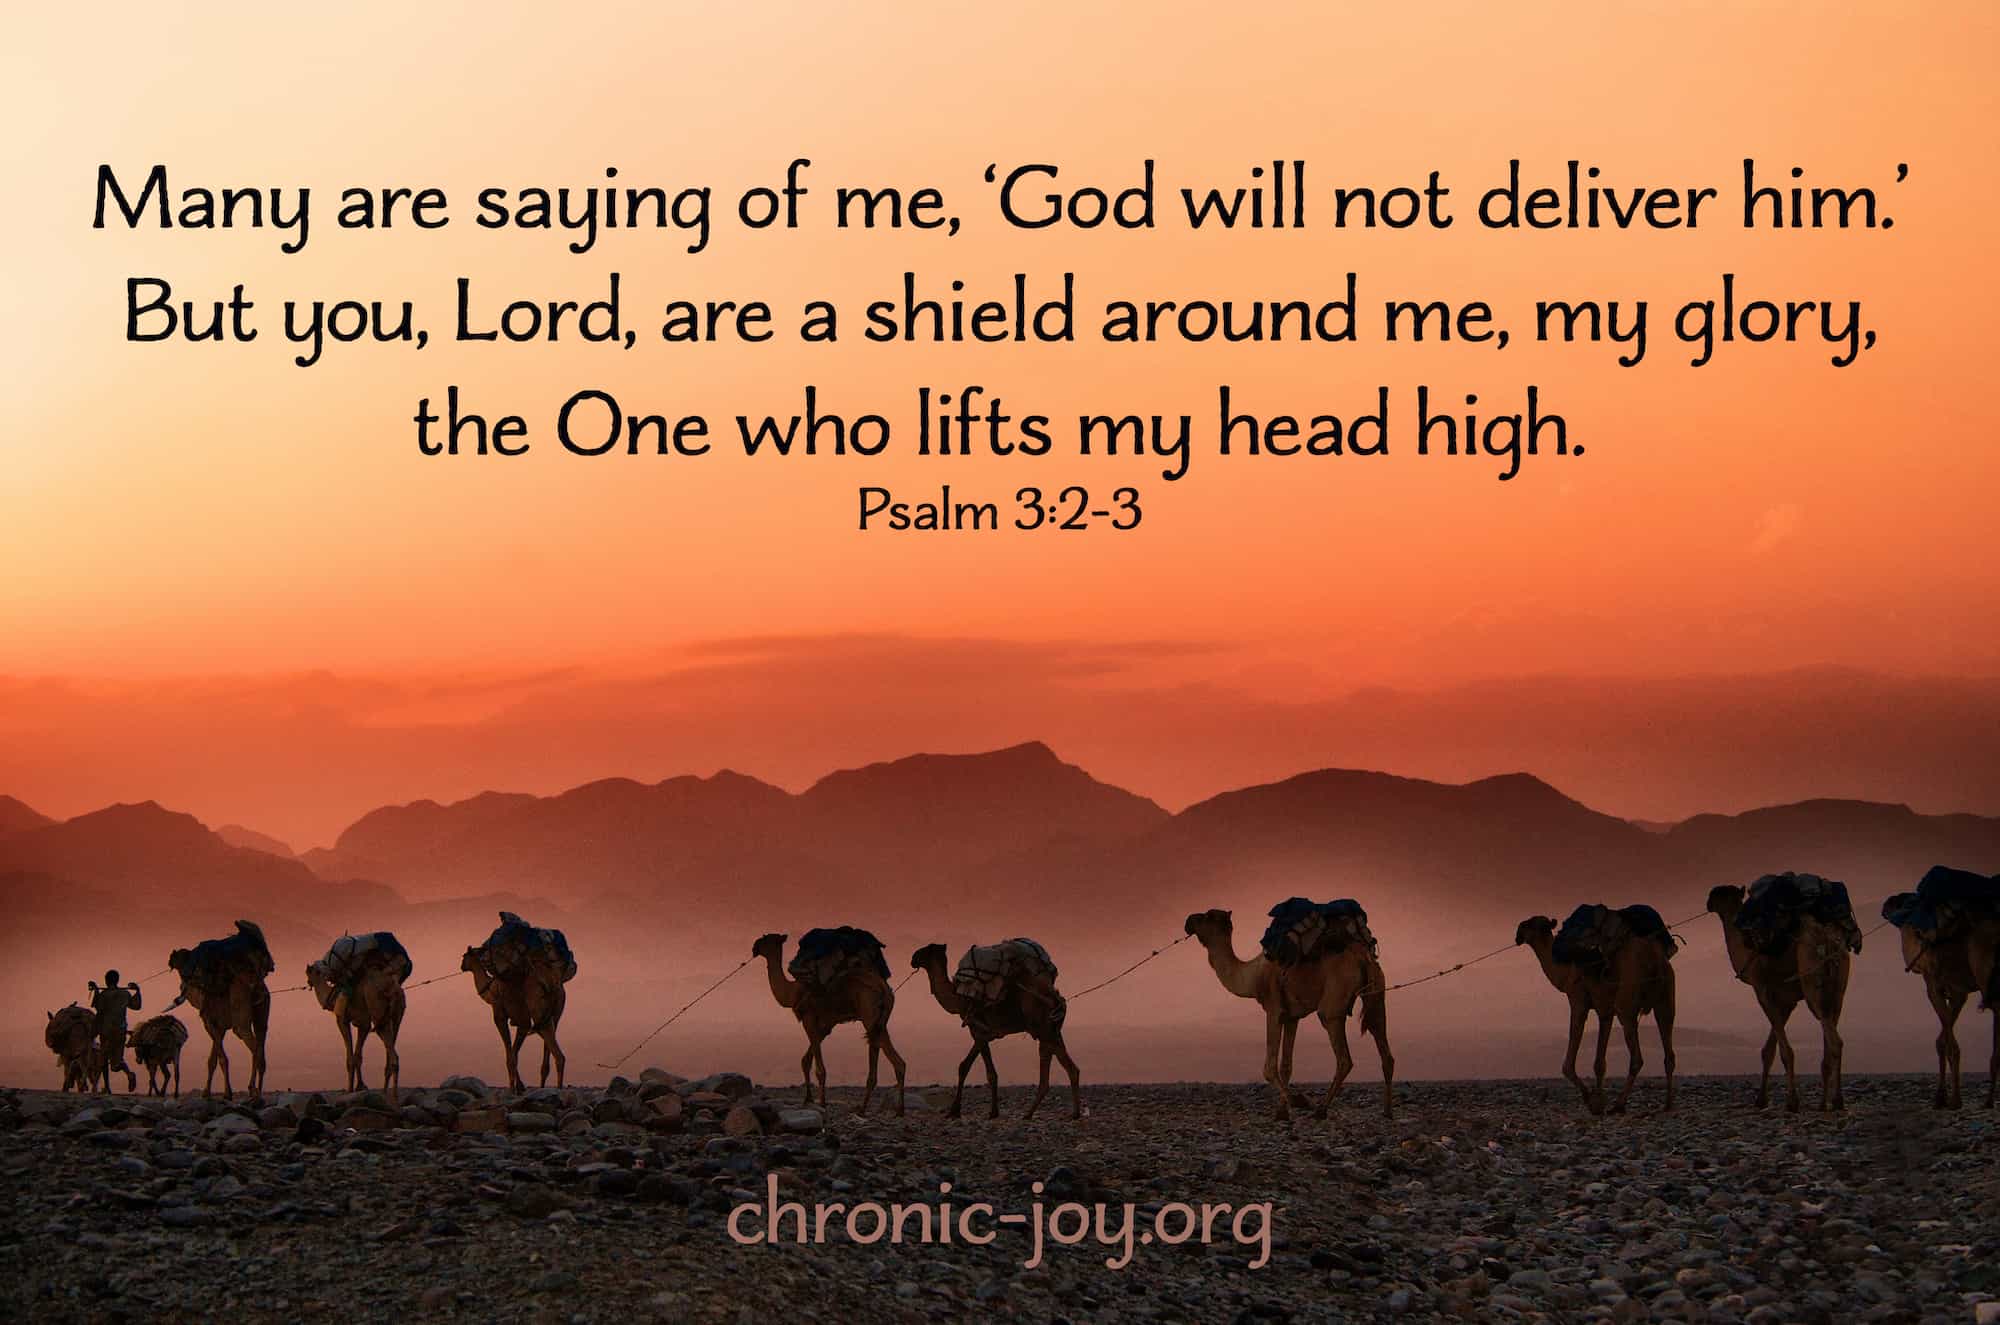 Lord, you are my shield